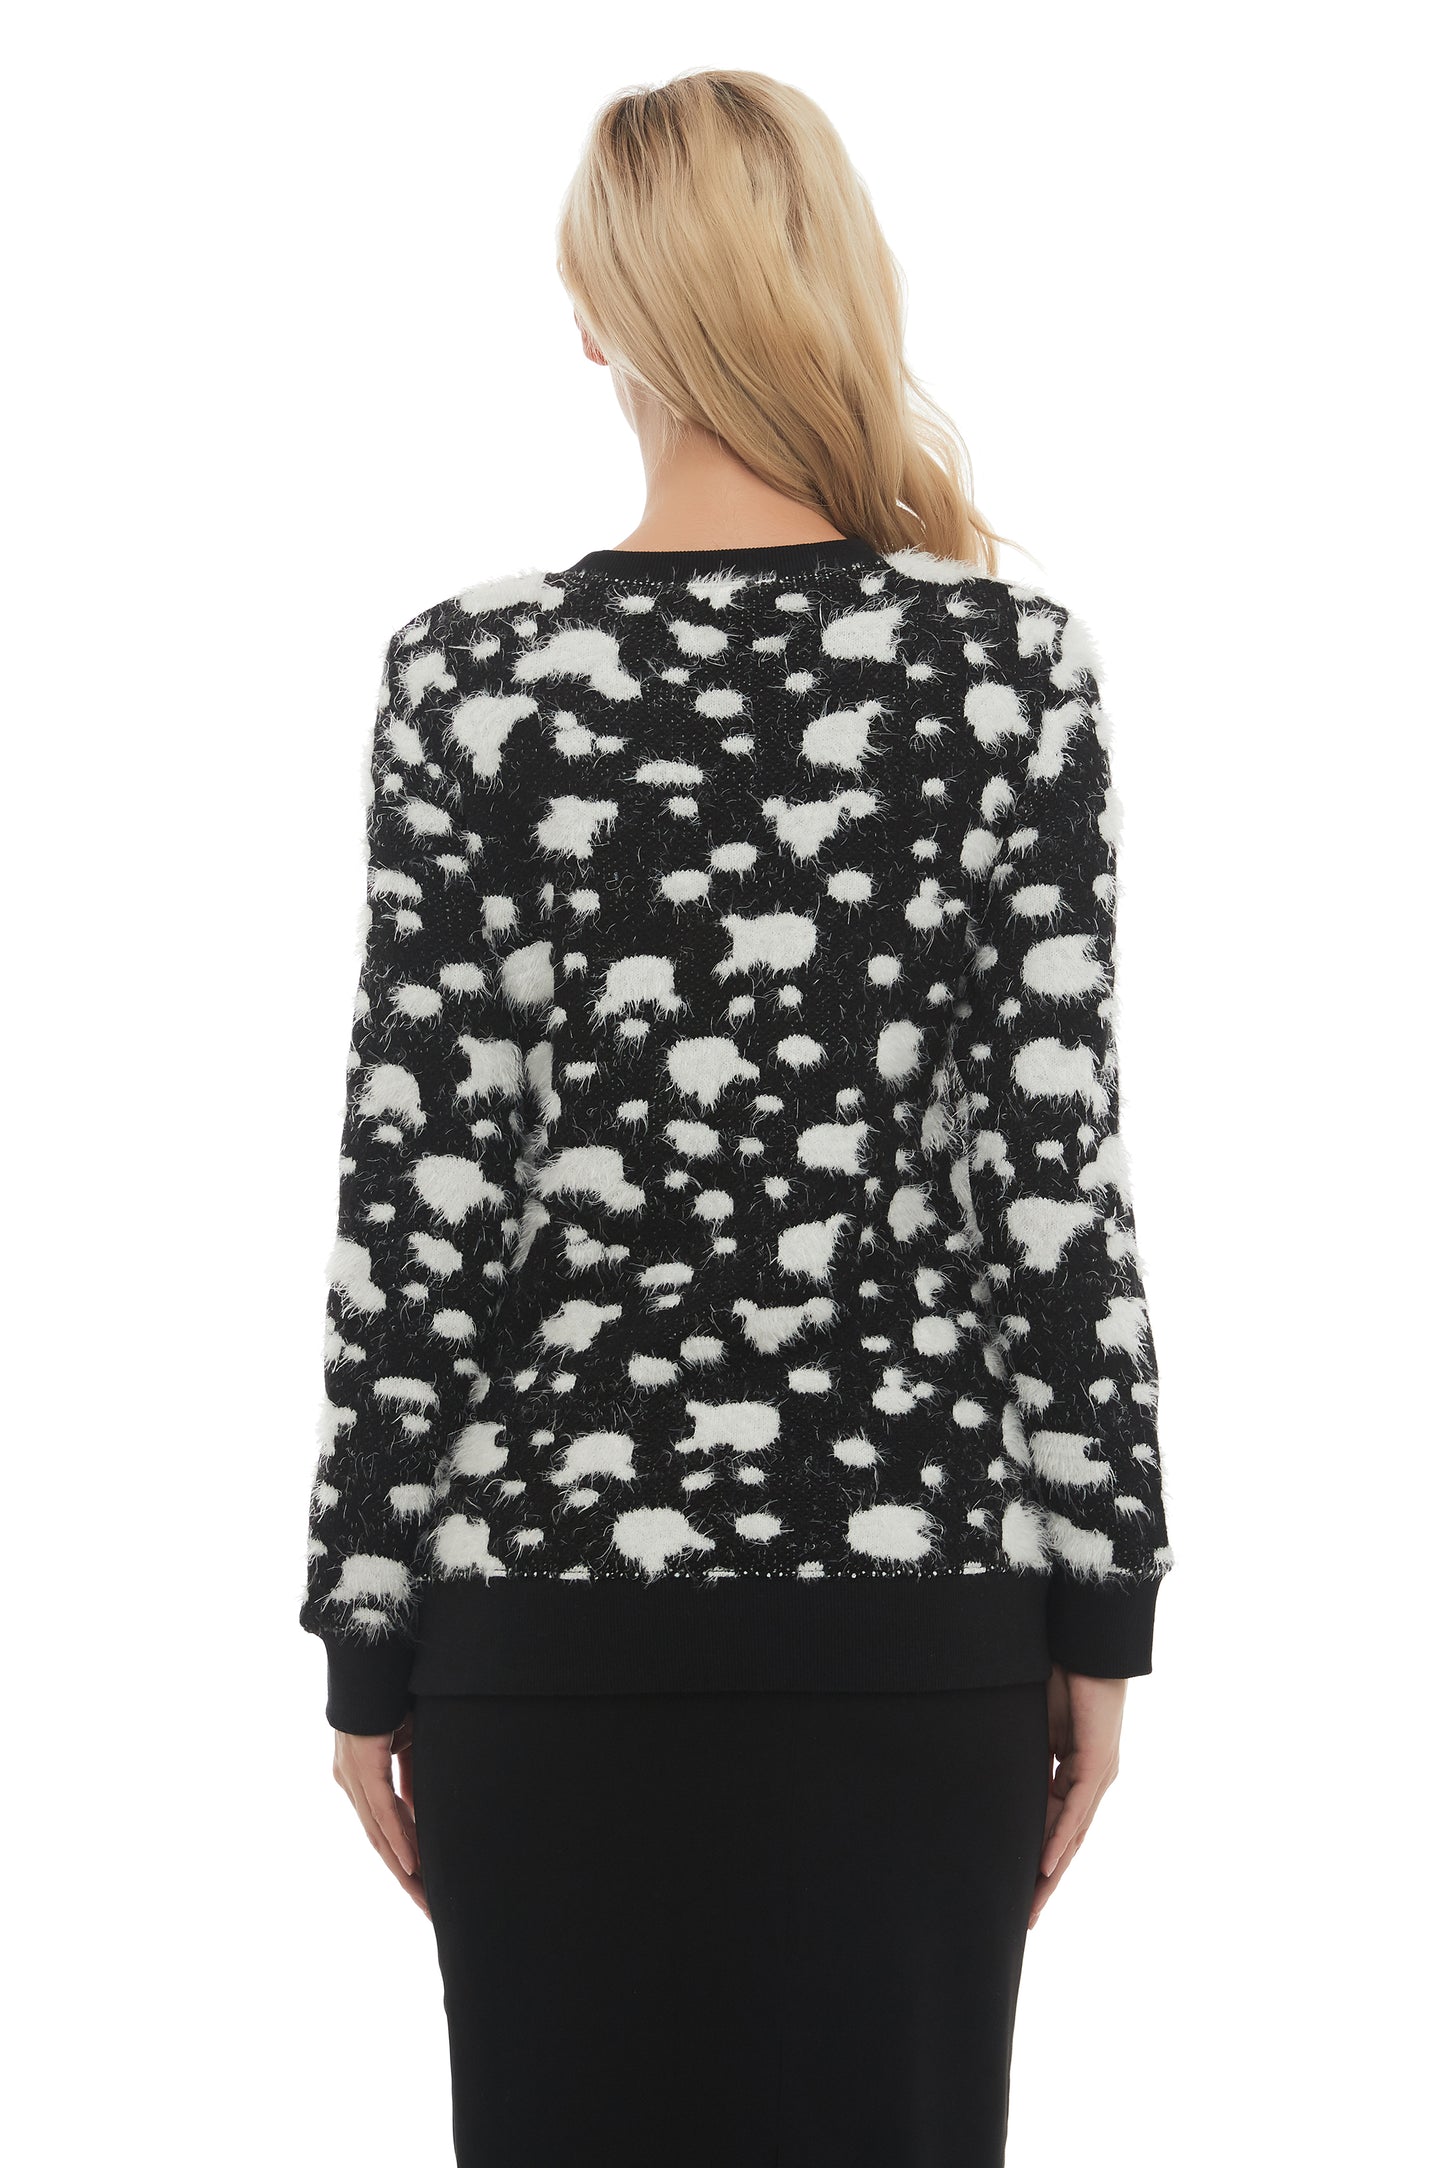 Long Sleeve Modest Mohair Black & White Sweater Top - seilerlanguageservices